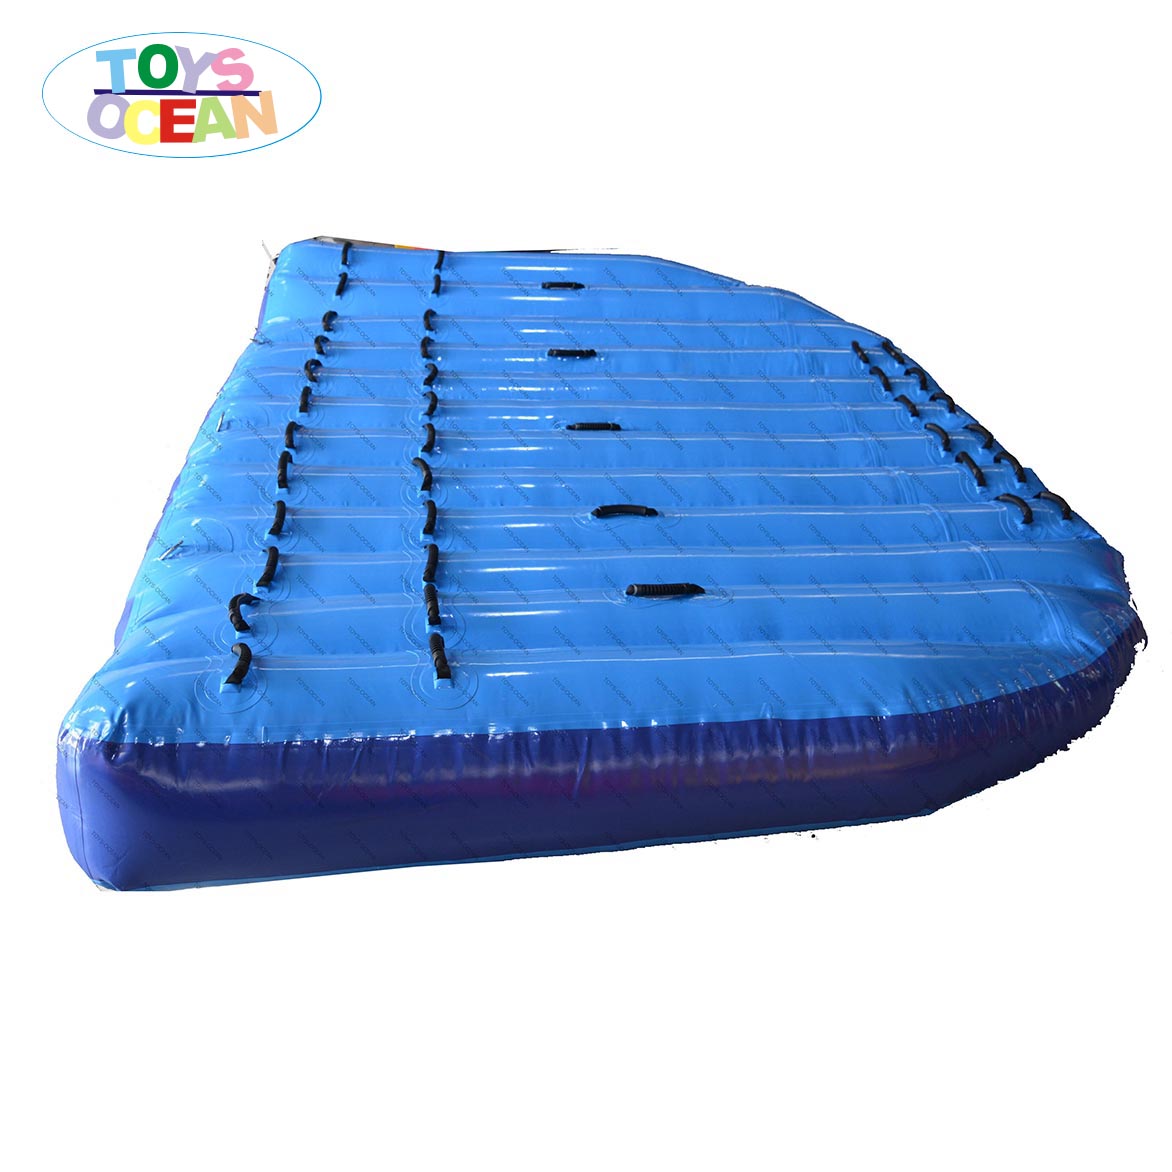 Towable Tubes Crazy Boat Inflatable Sports Water Games